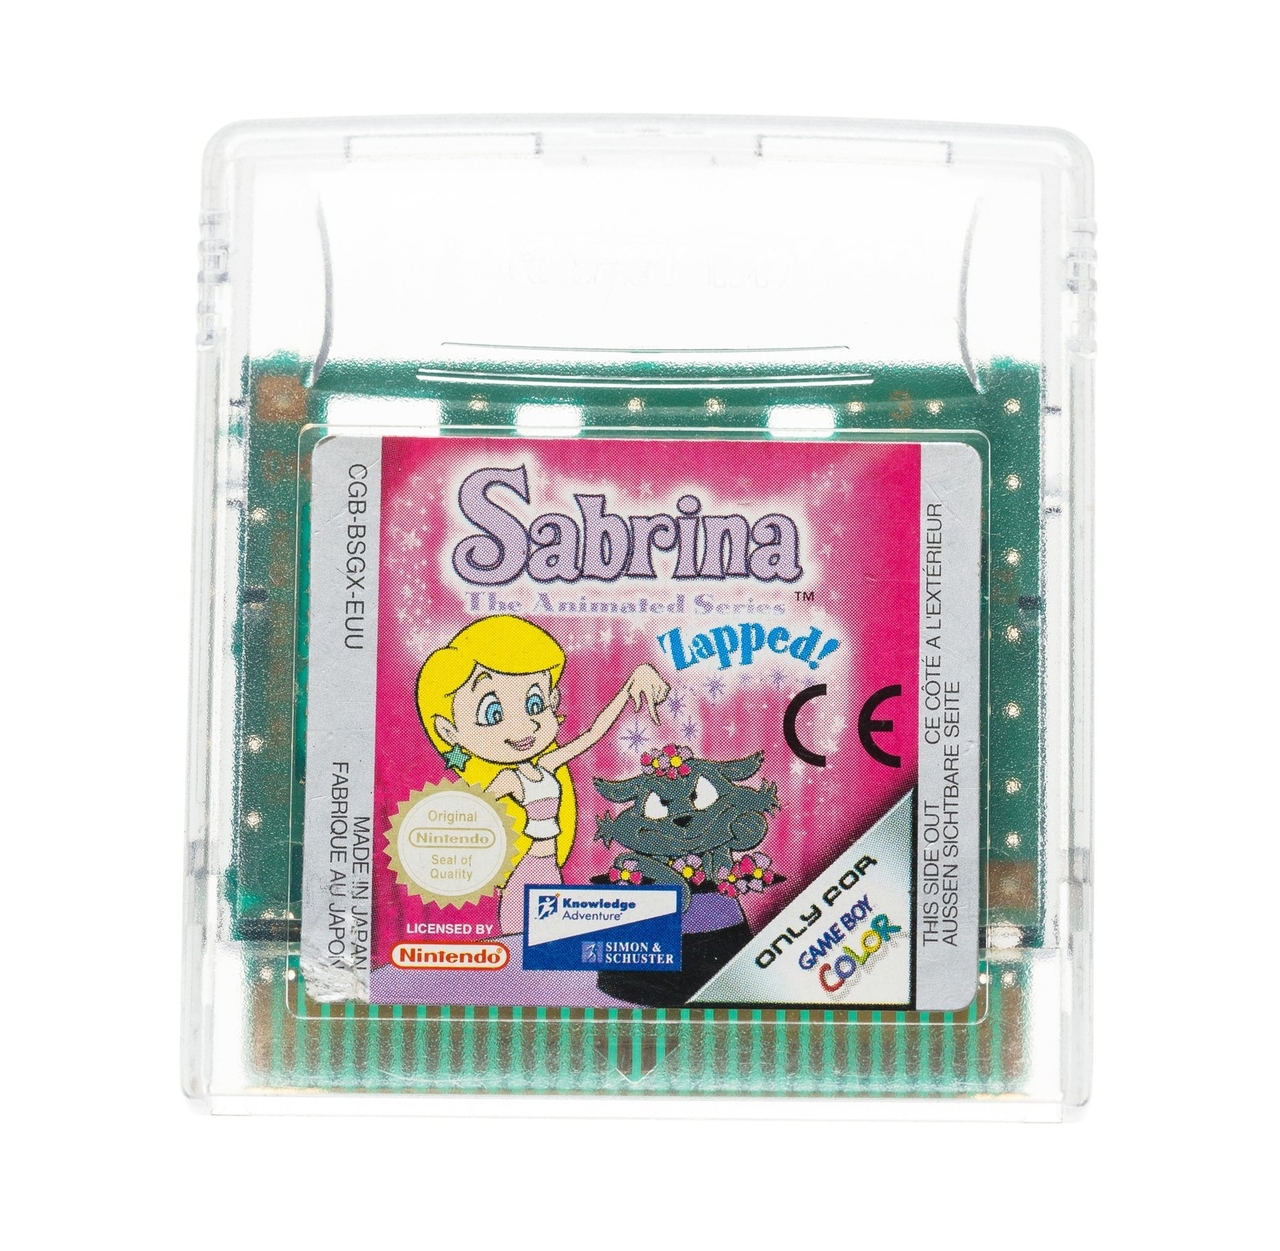 Sabrina: The Animated Series: Zapped! - Gameboy Color Games